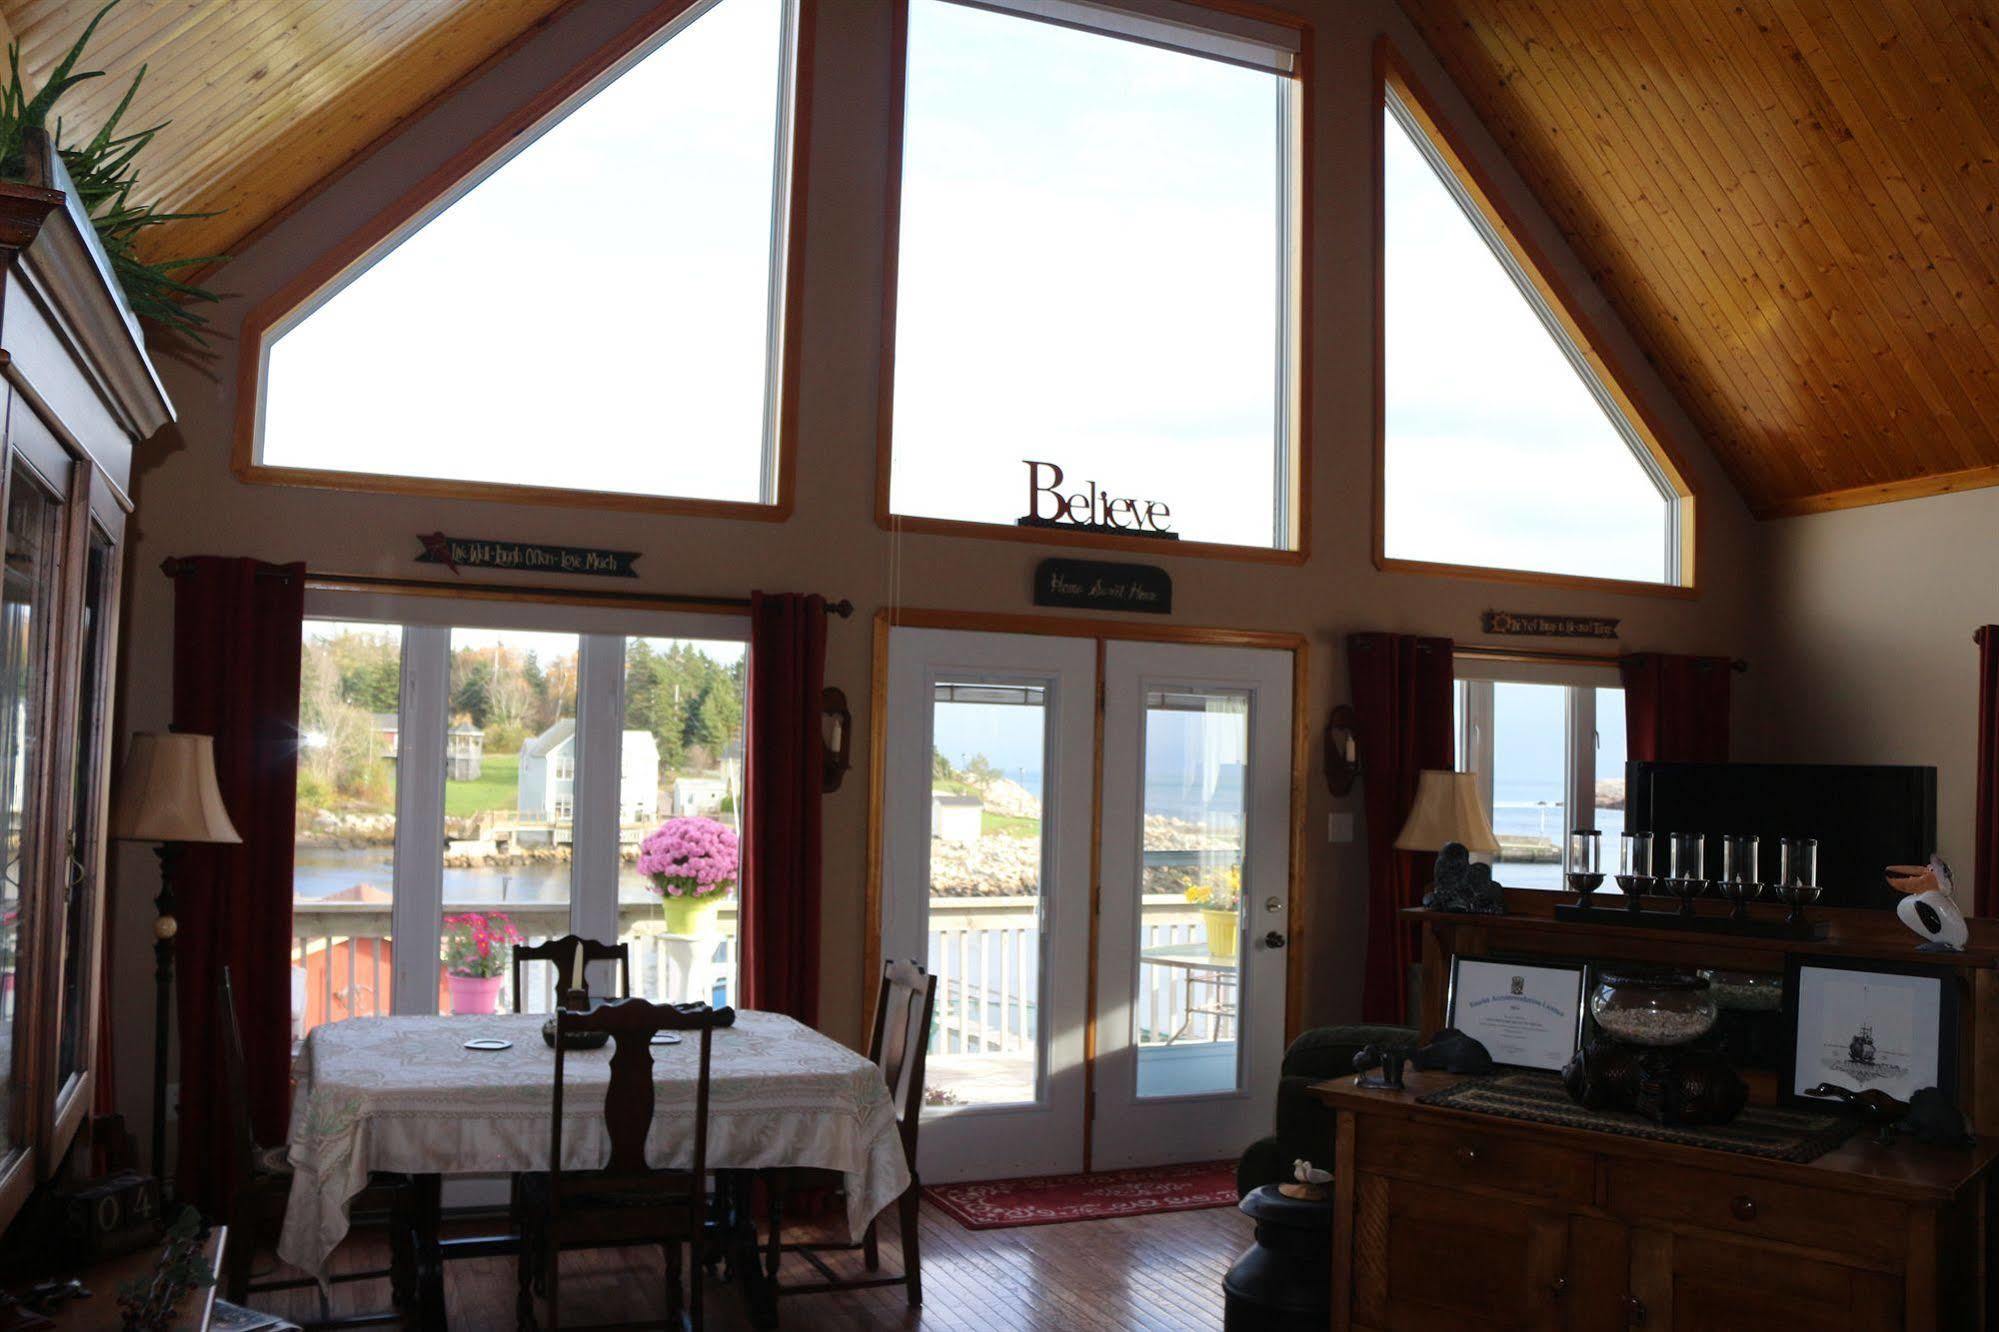 Sal'S Bed And Breakfast By The Sea Herring Cove Экстерьер фото